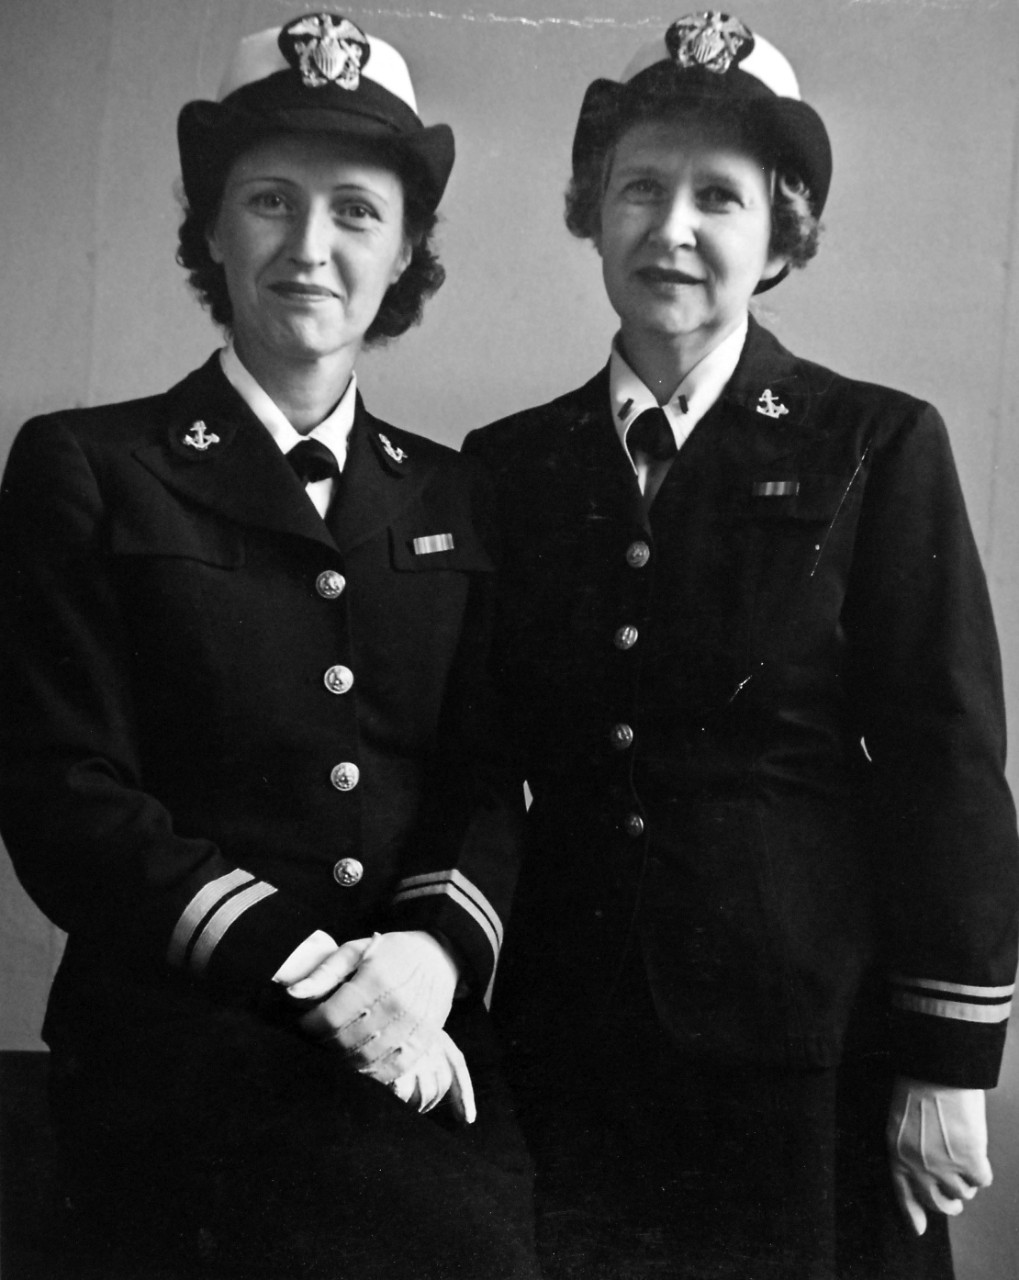 80-G-150865:  WAVES Naval Officers, September 1943.  Lieutenant Junior Grade Joy Bright Hancock, USNR, and Lieutenant Junior Grade Eunice Whyte, USNR, are the only WAVES entitled to wear the Victory Medal of World War I.  Both are assigned to duty in the Bureau of Aeronautics, Navy Department, Washington, D.C.  They served as Yeomanettes in the last war.   Released September 16, 1943.   U.S. Navy Photograph, now in the collections of the National Archives.   